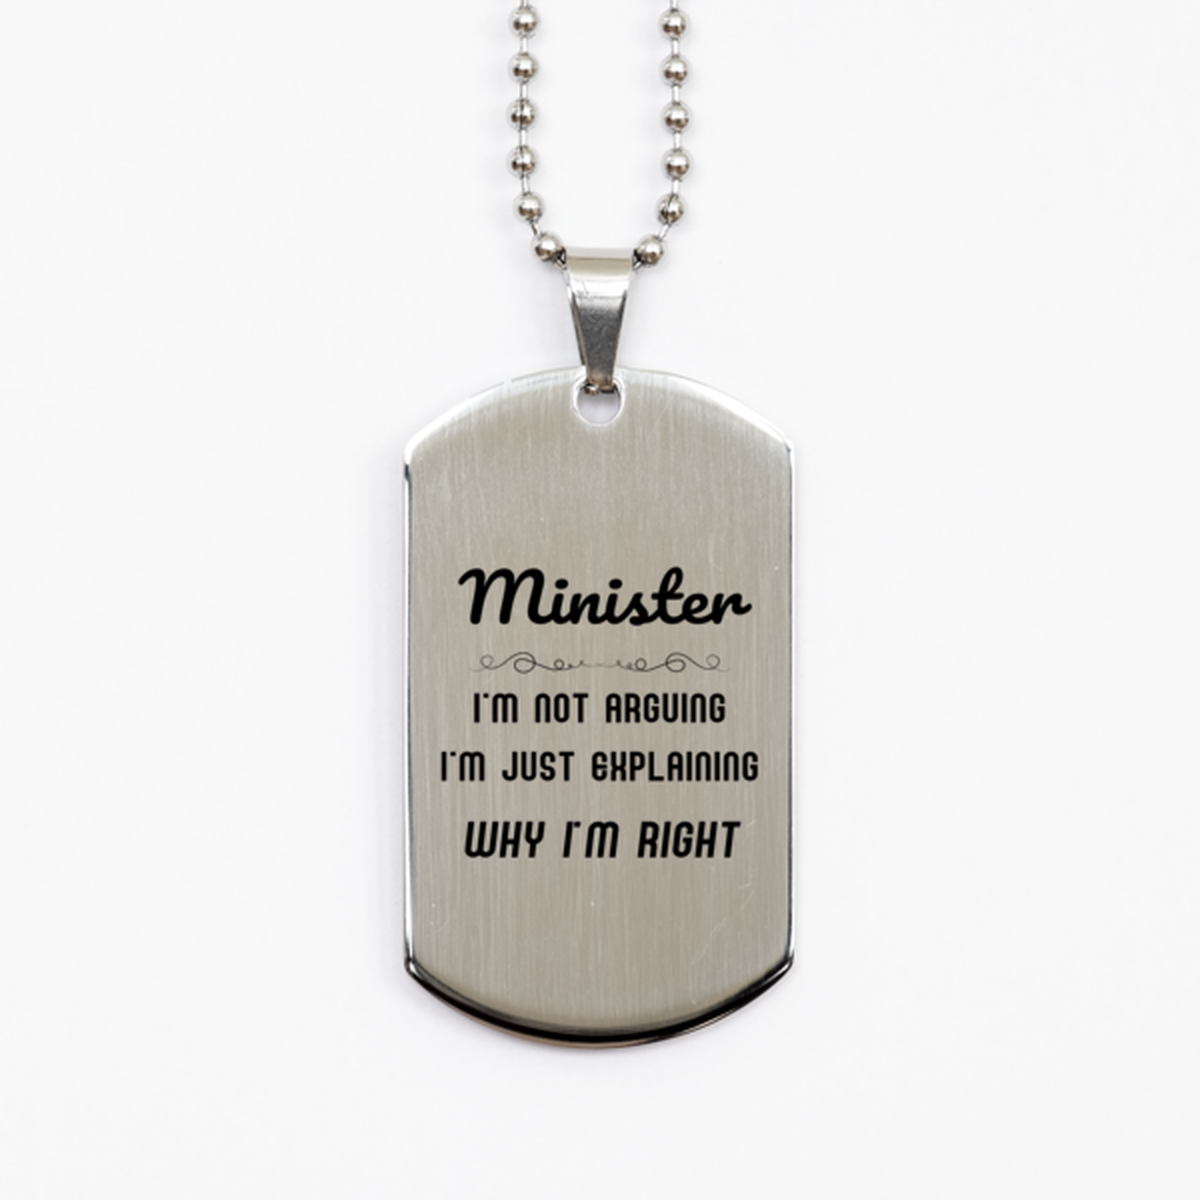 Minister I'm not Arguing. I'm Just Explaining Why I'm RIGHT Silver Dog Tag, Funny Saying Quote Minister Gifts For Minister Graduation Birthday Christmas Gifts for Men Women Coworker